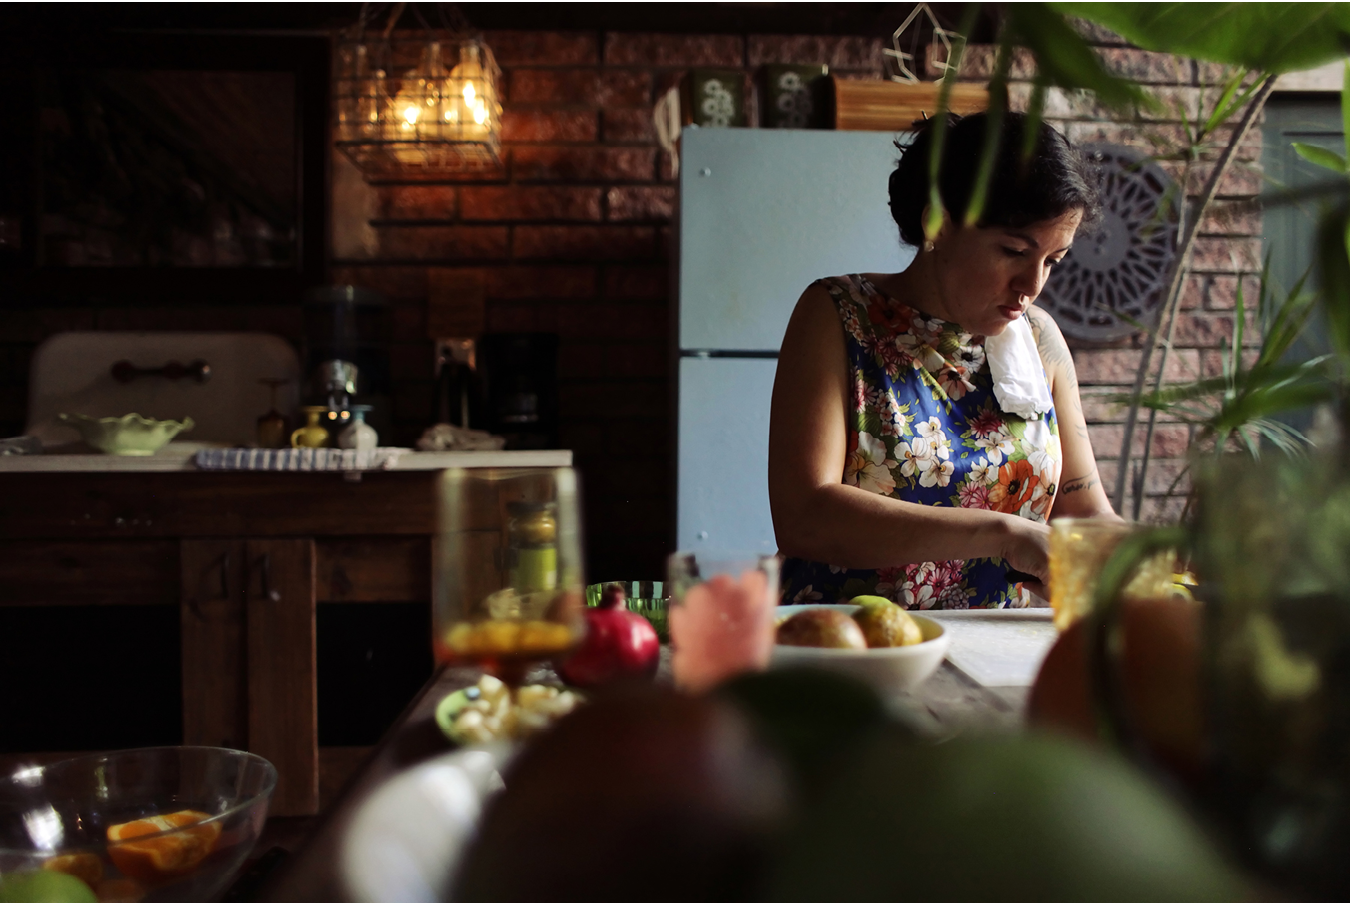 Image of a woman at a kitchen counter. The counter has plants, fruits and bowls spread across it. 